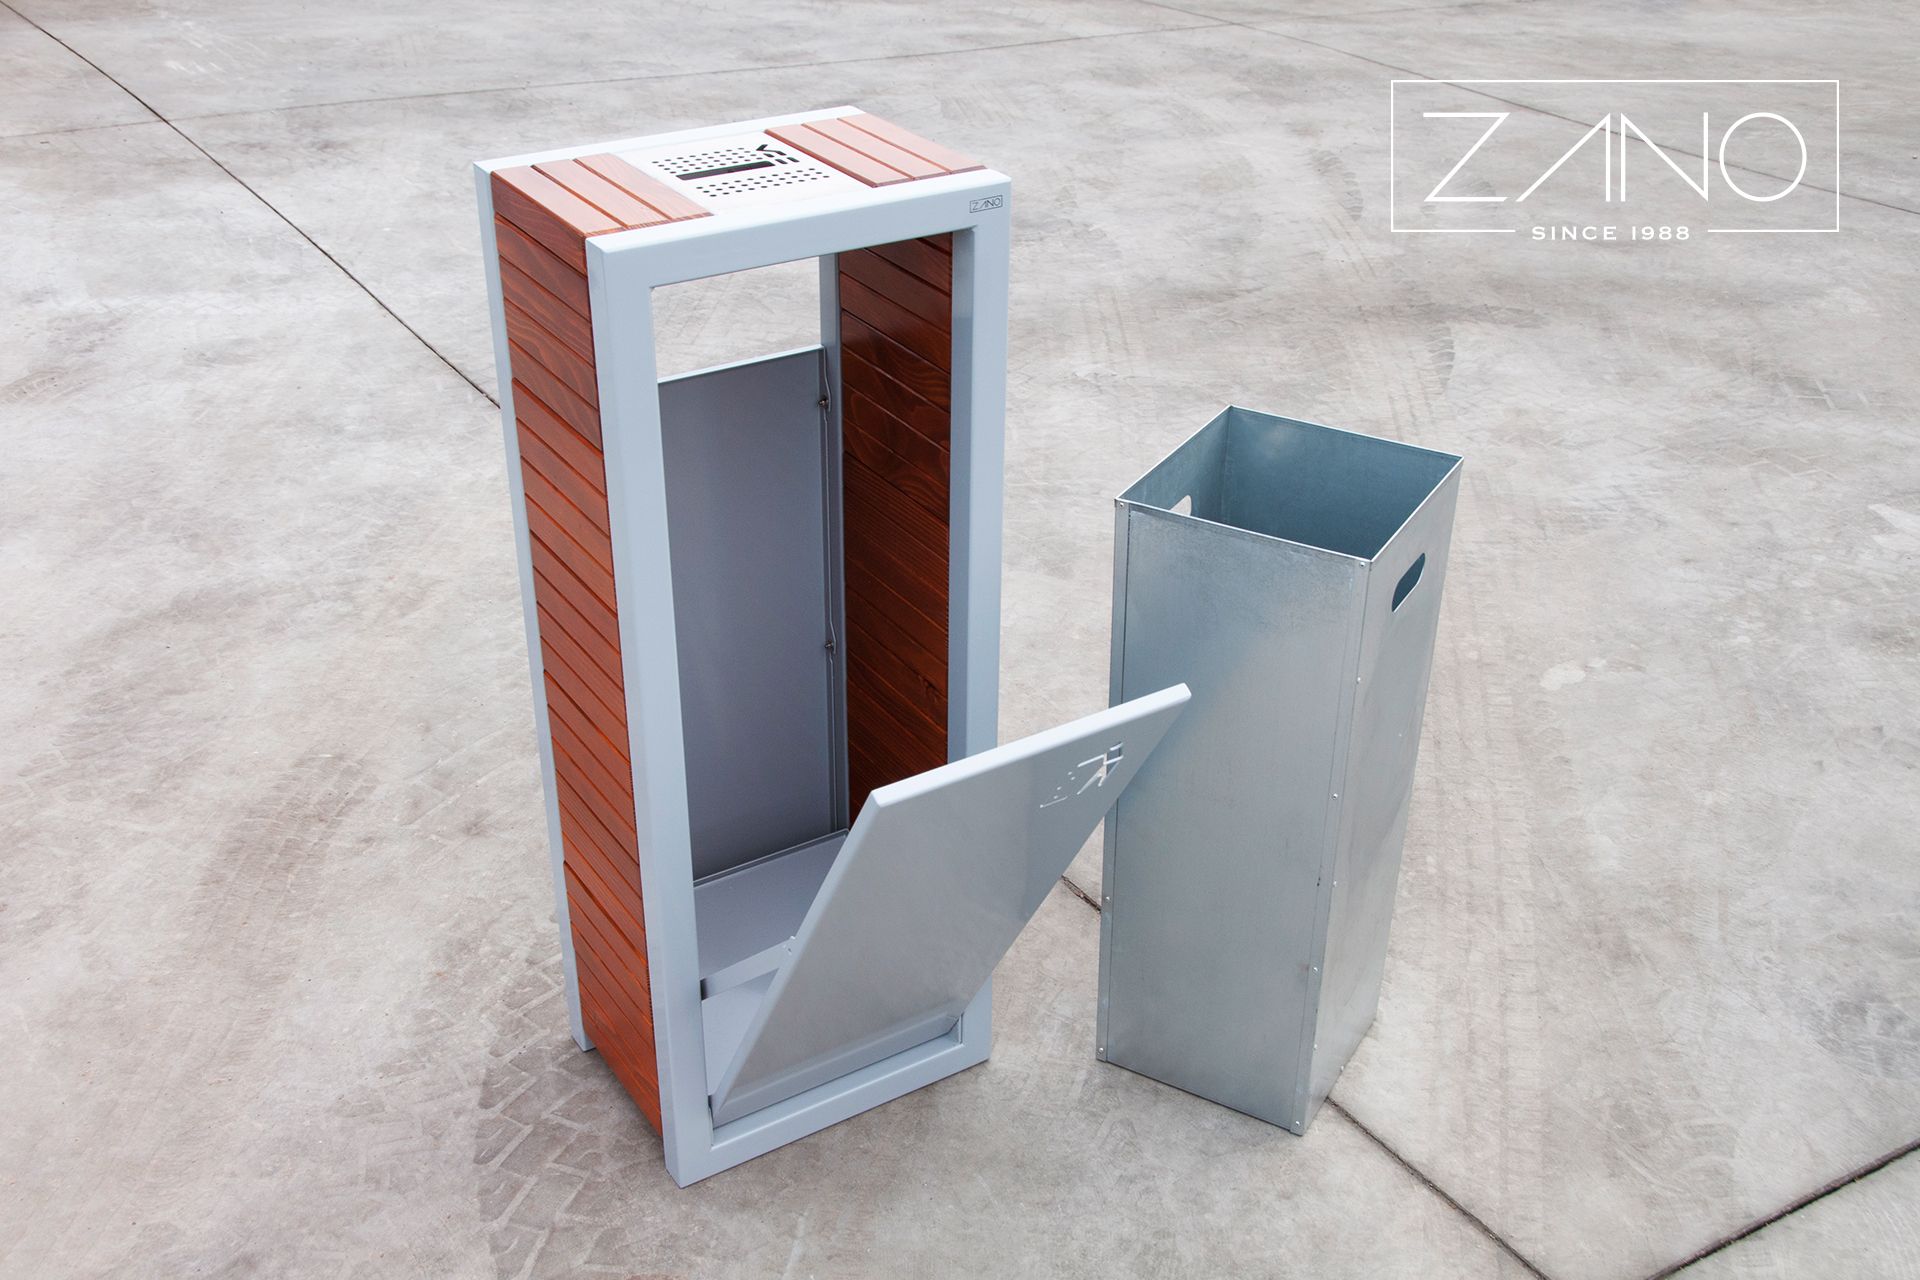 Street waste bins with removable liners